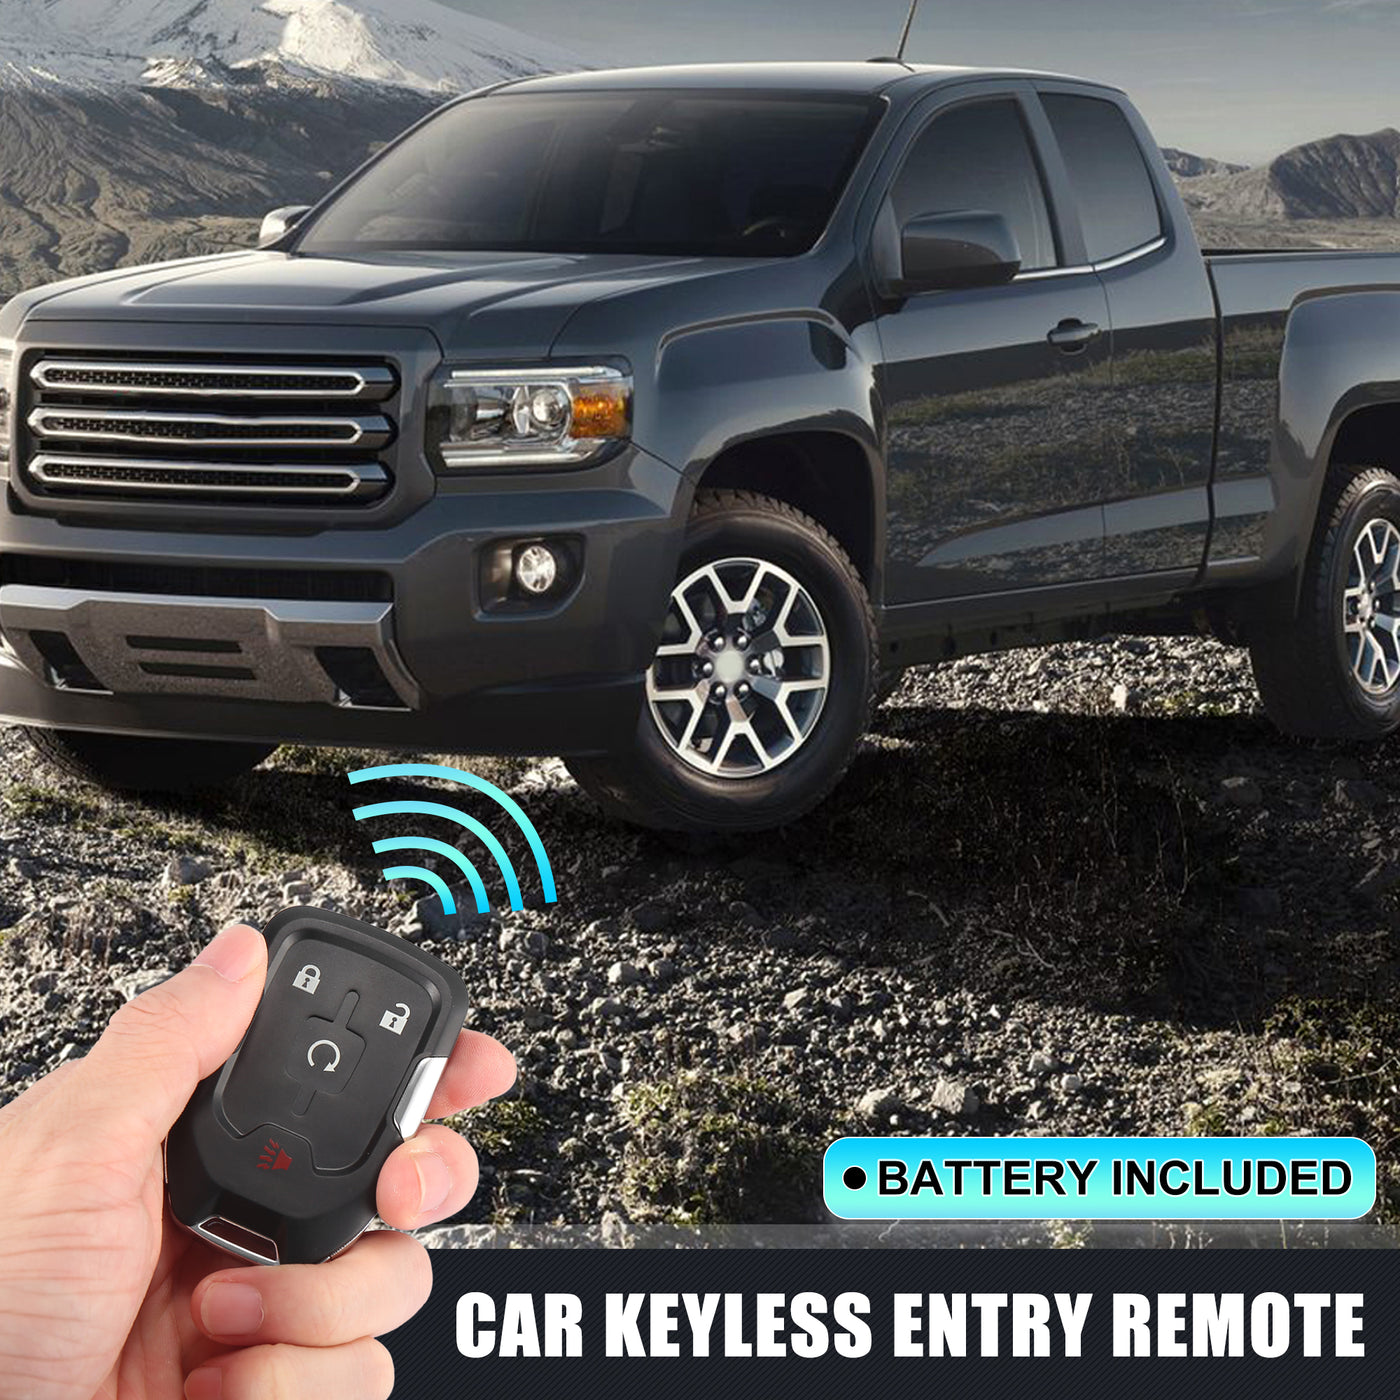 X AUTOHAUX HYQ1AA 315MHz Replacement Keyless Entry Remote Car Key Fob for GMC Terrain 2018 2019 2020 2021 2022 13584512 4 Key Button with Door Key